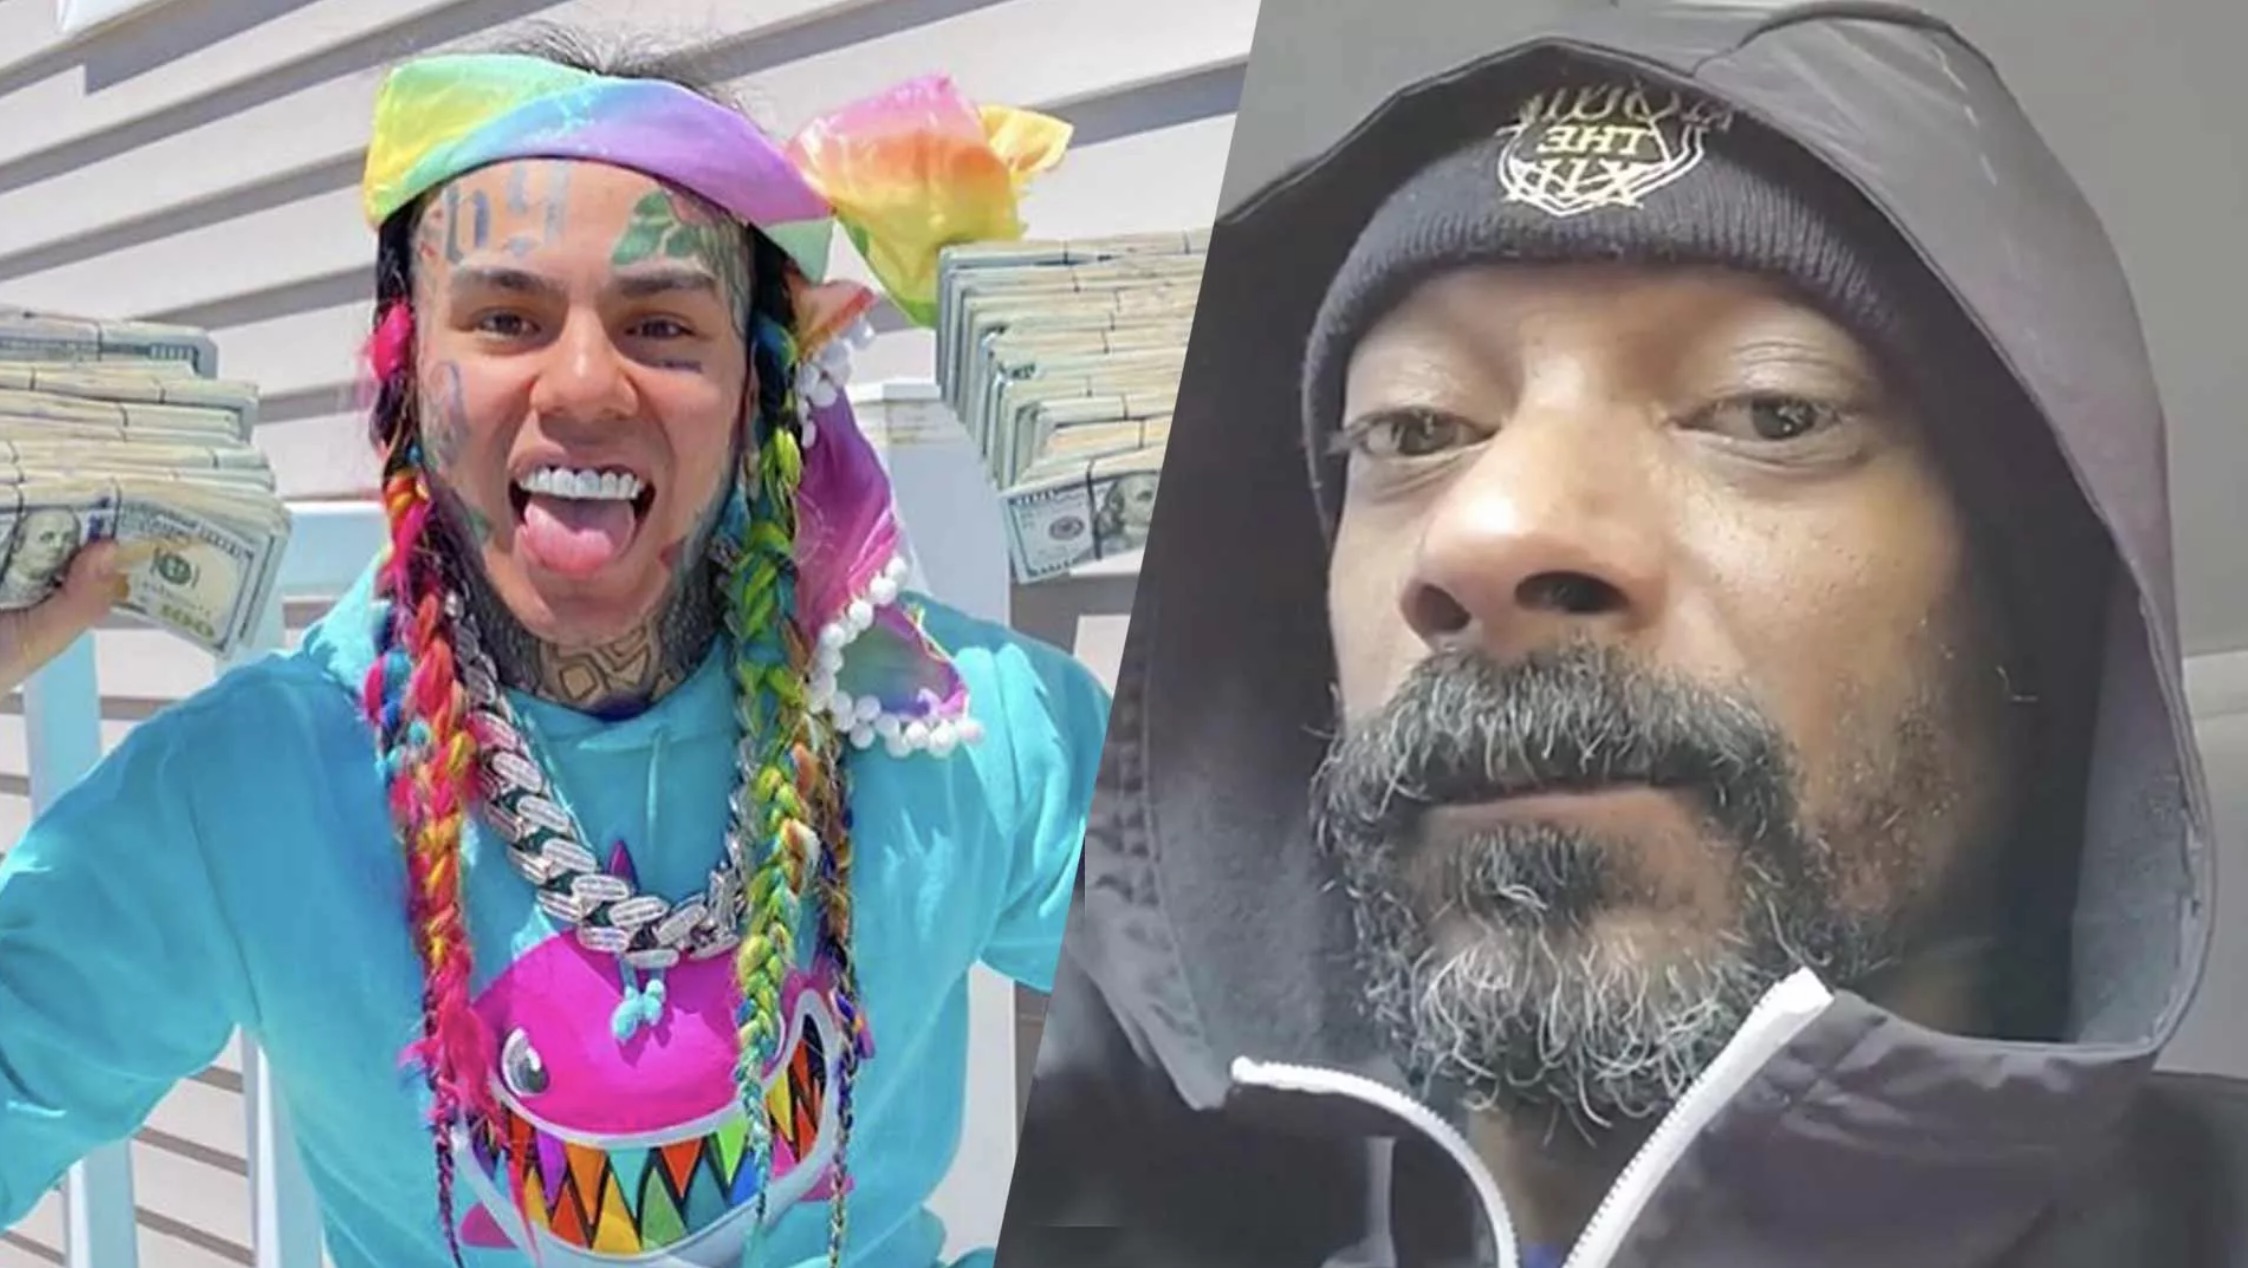 Tekashi 6ix9ine Reminds Us That Snoop Dogg is also a "Snitch" in this [Video]